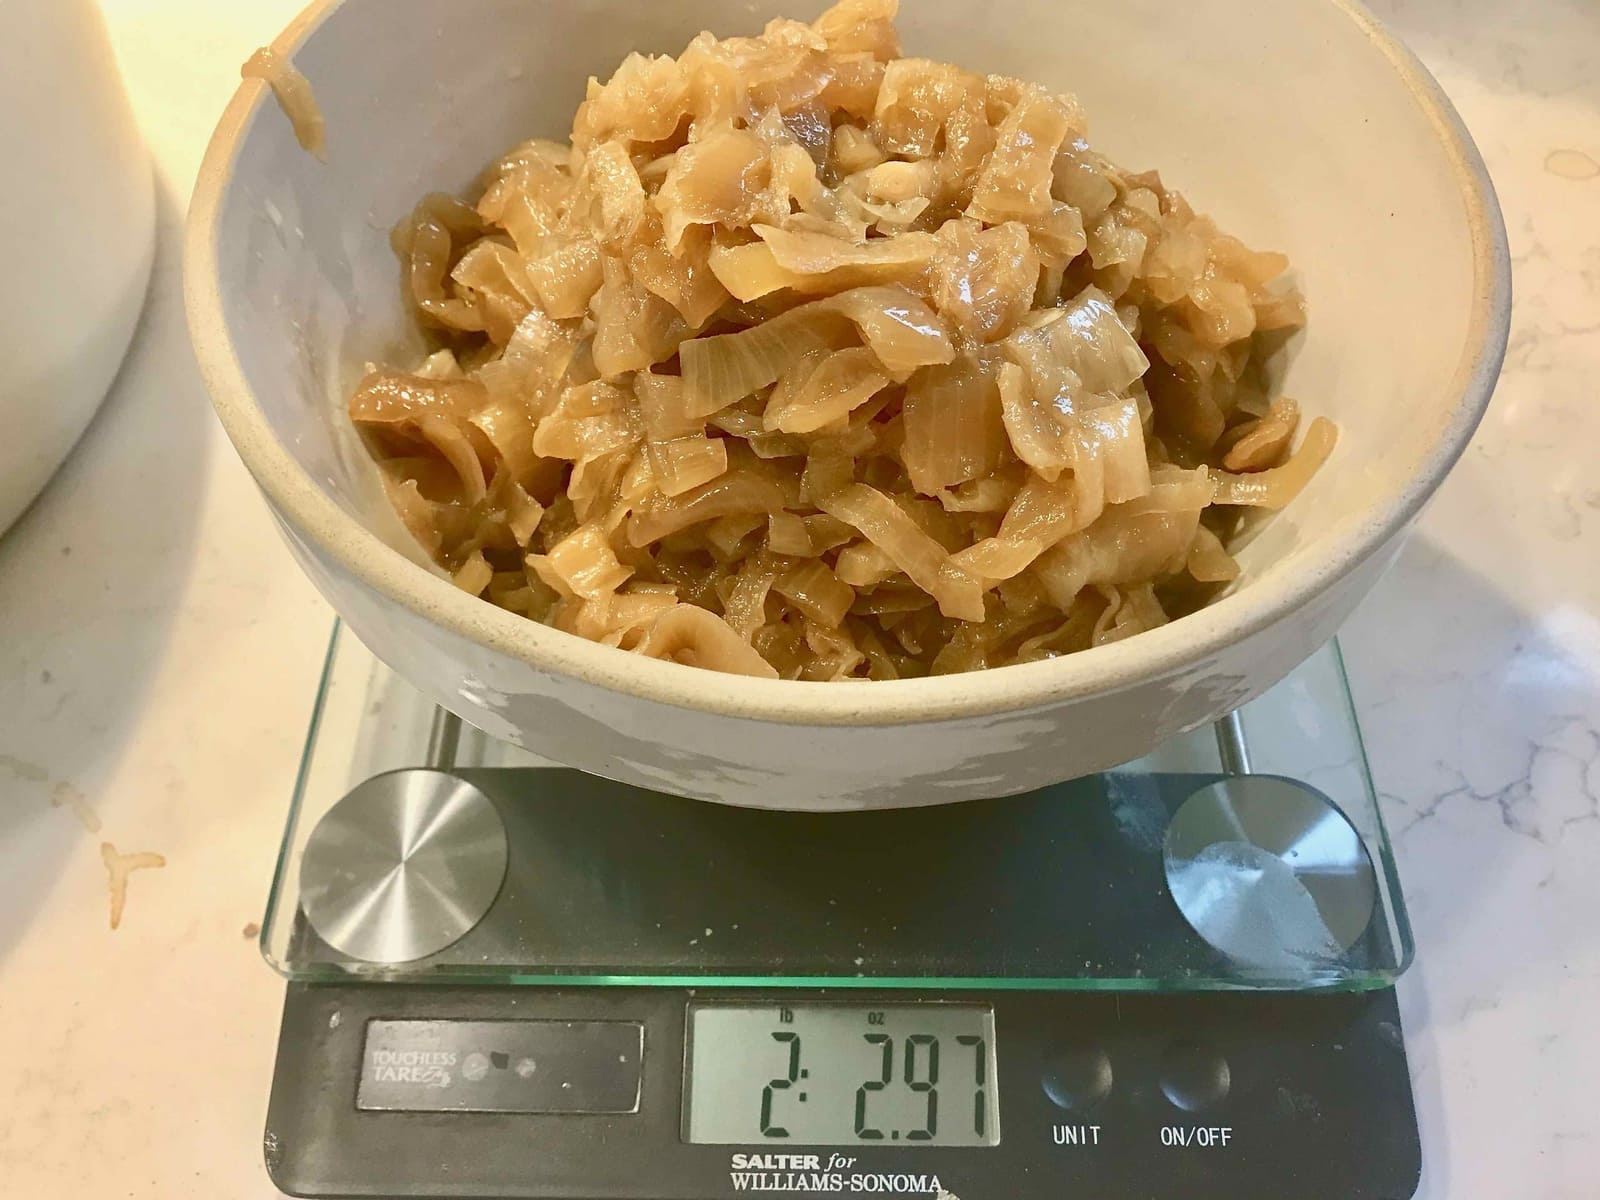 Caramelized onions on the scale -- weighing 2 pounds.